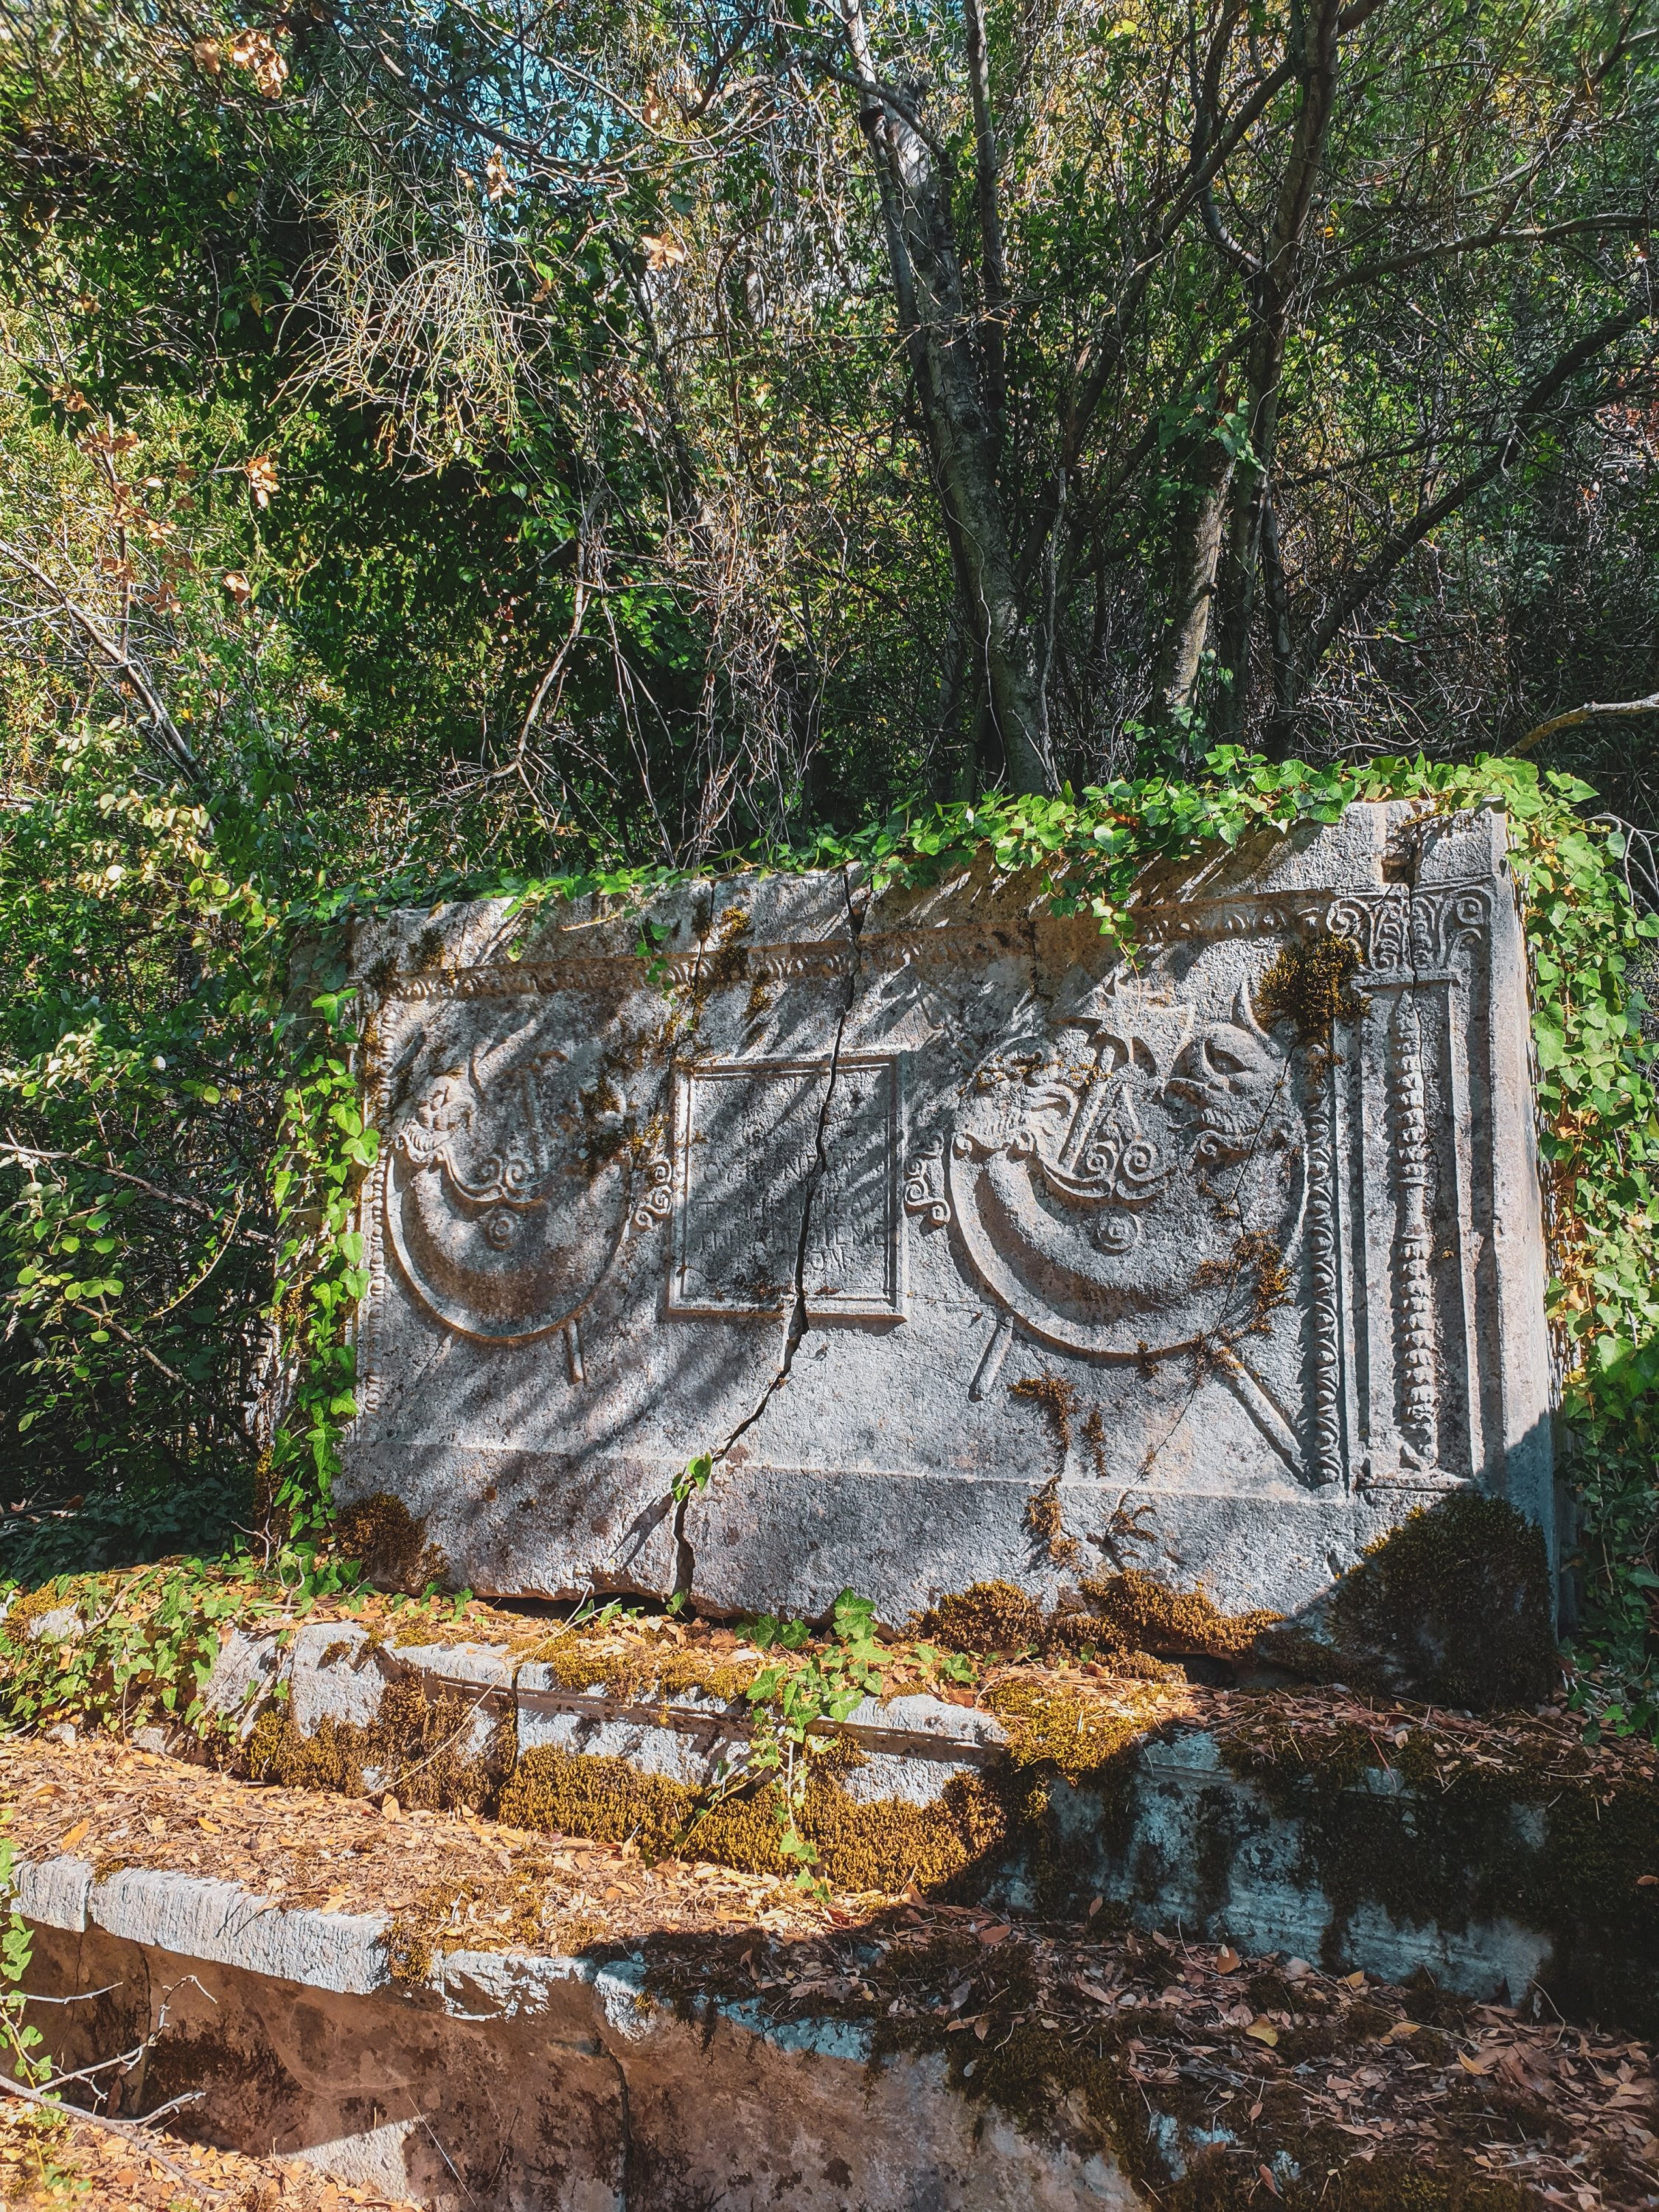 There are many historical graves scattered on the grounds of Termessos. (Photo by Argun Konuk)